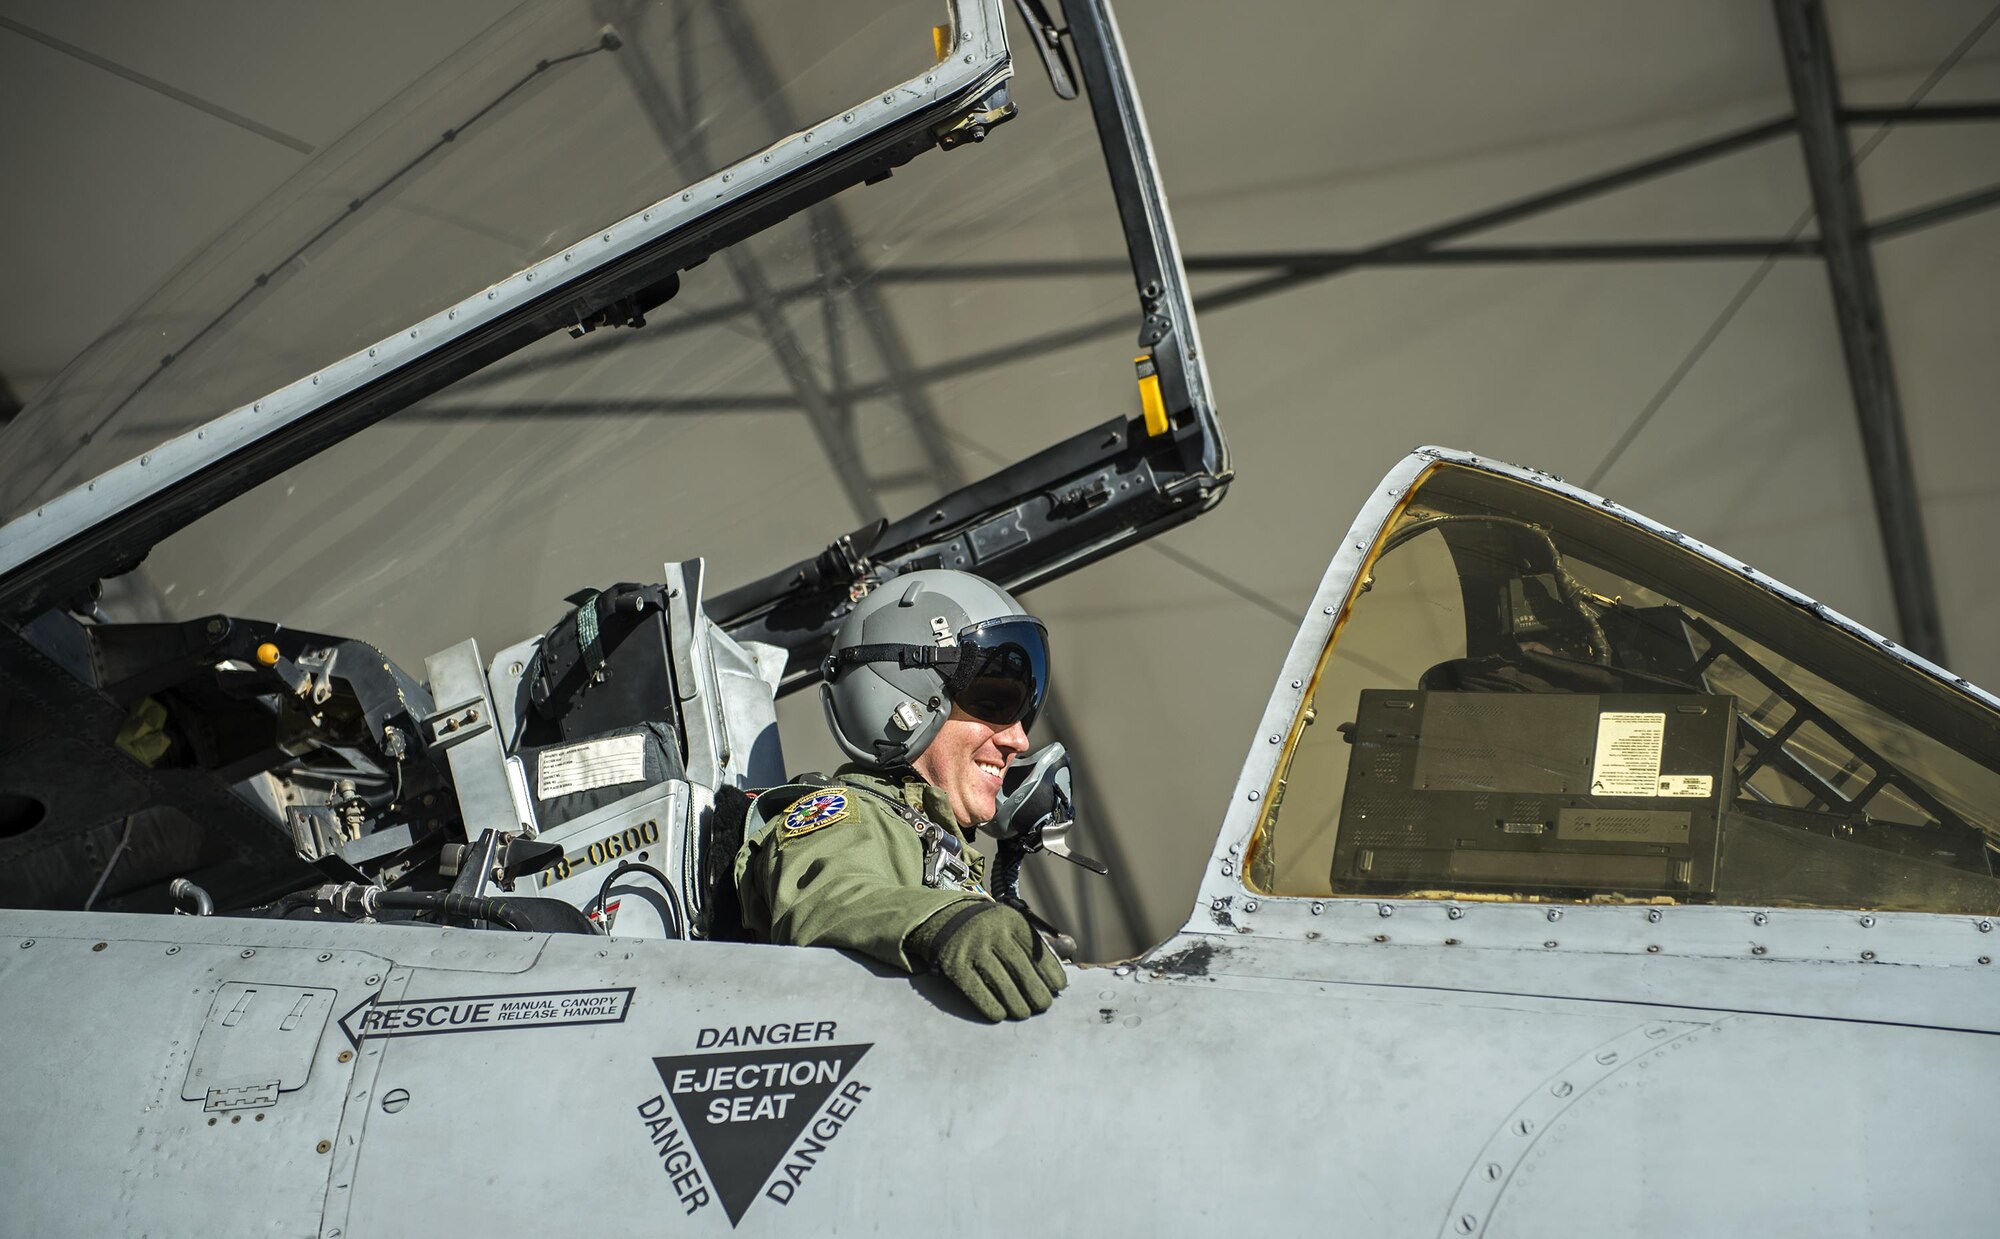 Capt. Thomas Ainscough, 74th Fighter Squadron A-10C Thunderbolt II pilot, laughs while waiting to taxi to the flightline, Jan. 12, 2017, at Moody Air Force Base, Ga. Ainscough and other Airmen and aircraft from the 74th FS were preparing to depart for a two-week long exercise at Nellis Air Force Base in Las Vegas, Nev. (U.S. Photo by Airman 1st Class Janiqua P. Robinson)